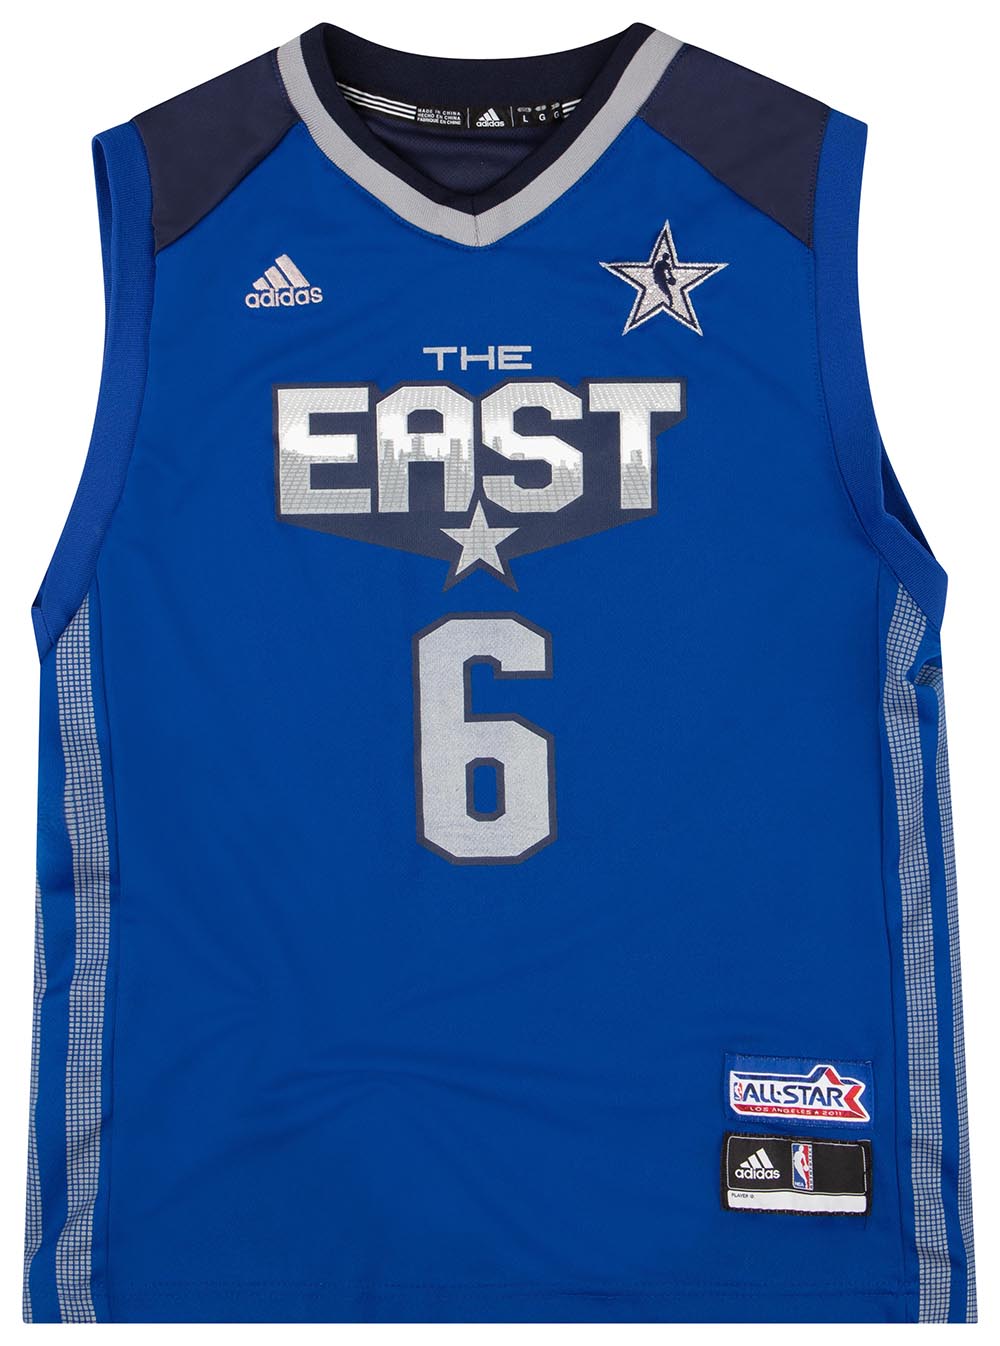 Adidas Reveals 2013 NBA All-Star Jerseys for East and West Teams